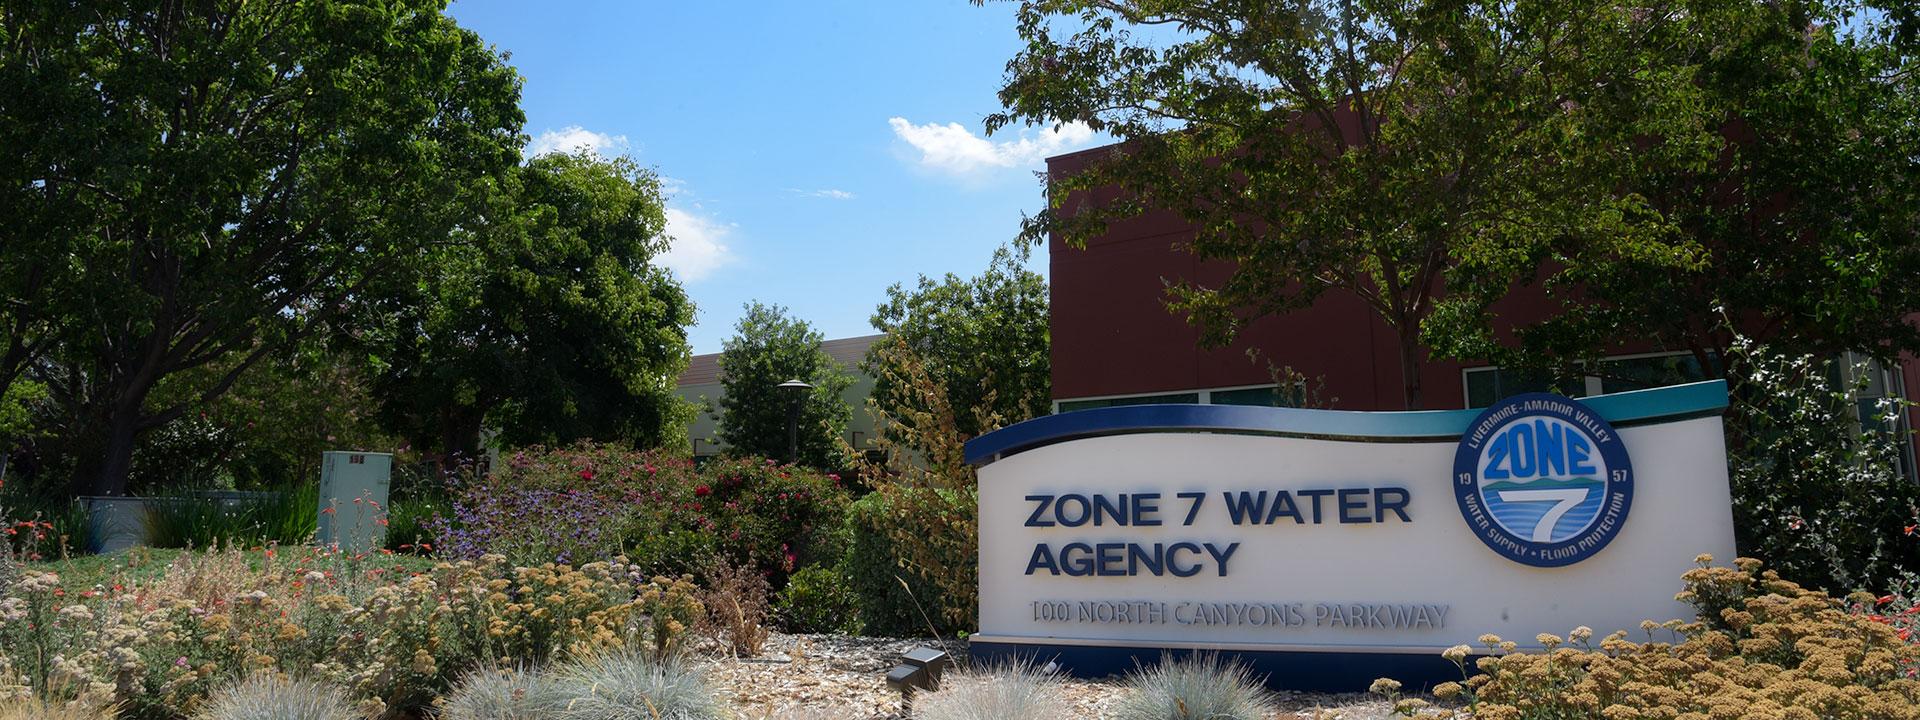 The Zone 7 Water Agency Headquarters monument sign in front of trees and a blue sky in the background